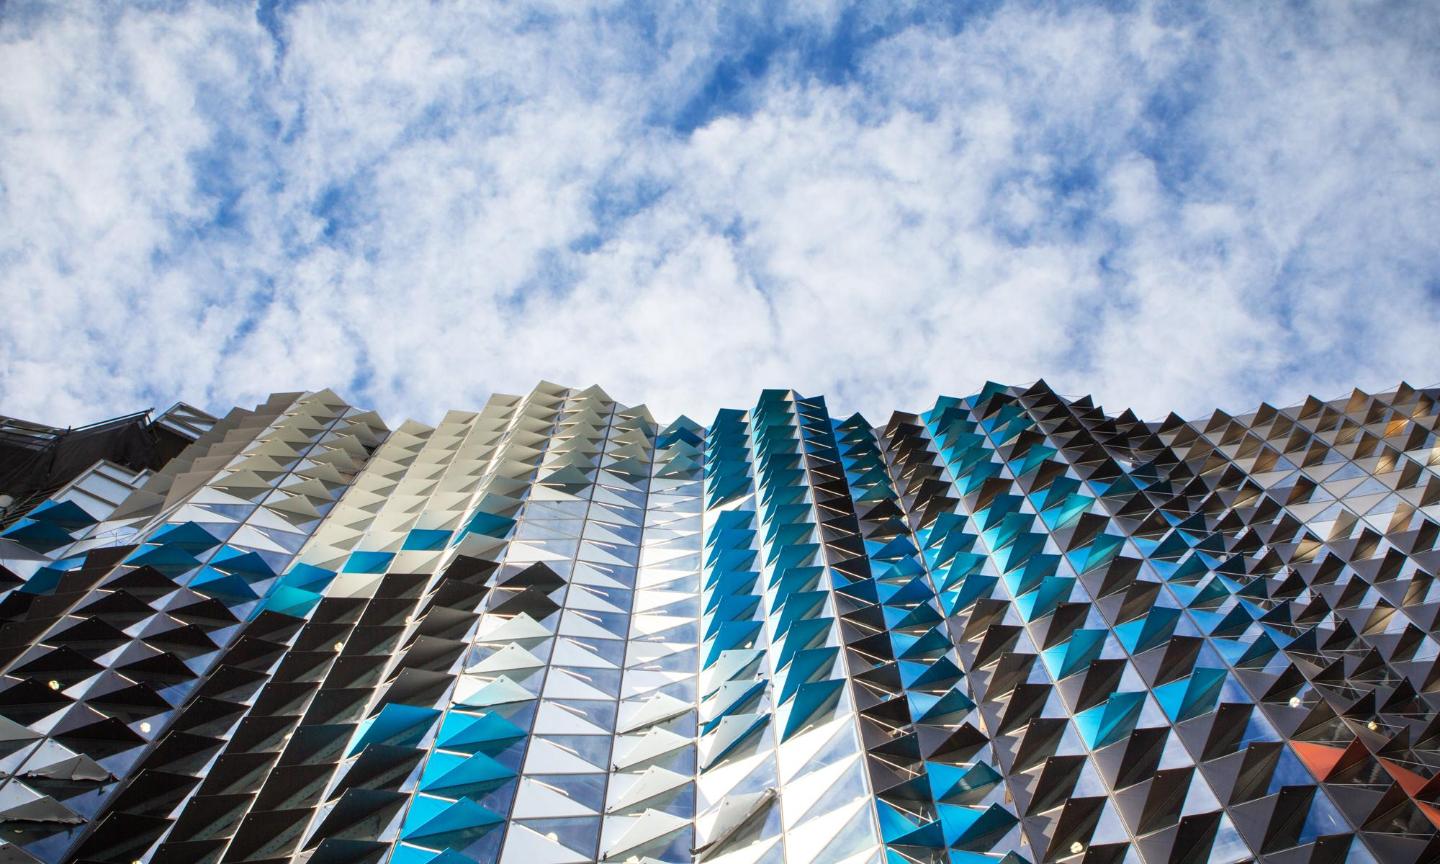 abstract photo of a mirrored building with blue sky and clouds above.